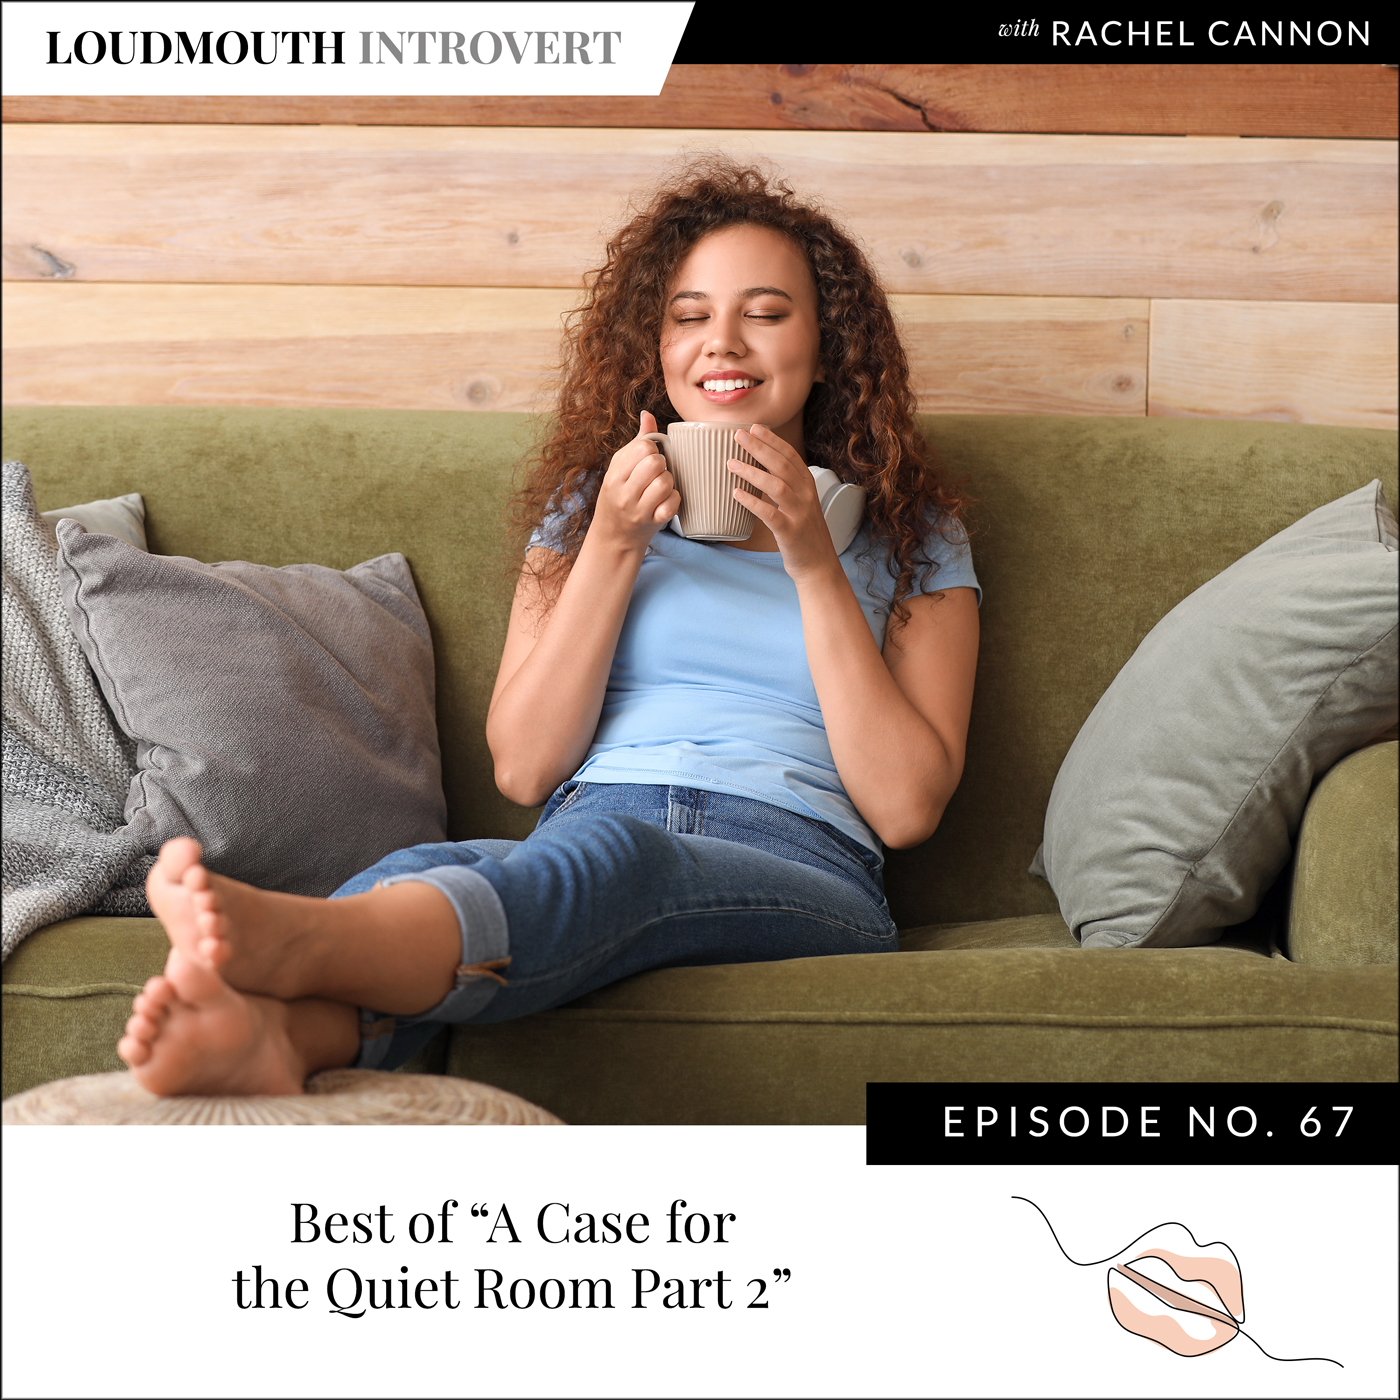 Best of "A Case for the Quiet Room Part 2"